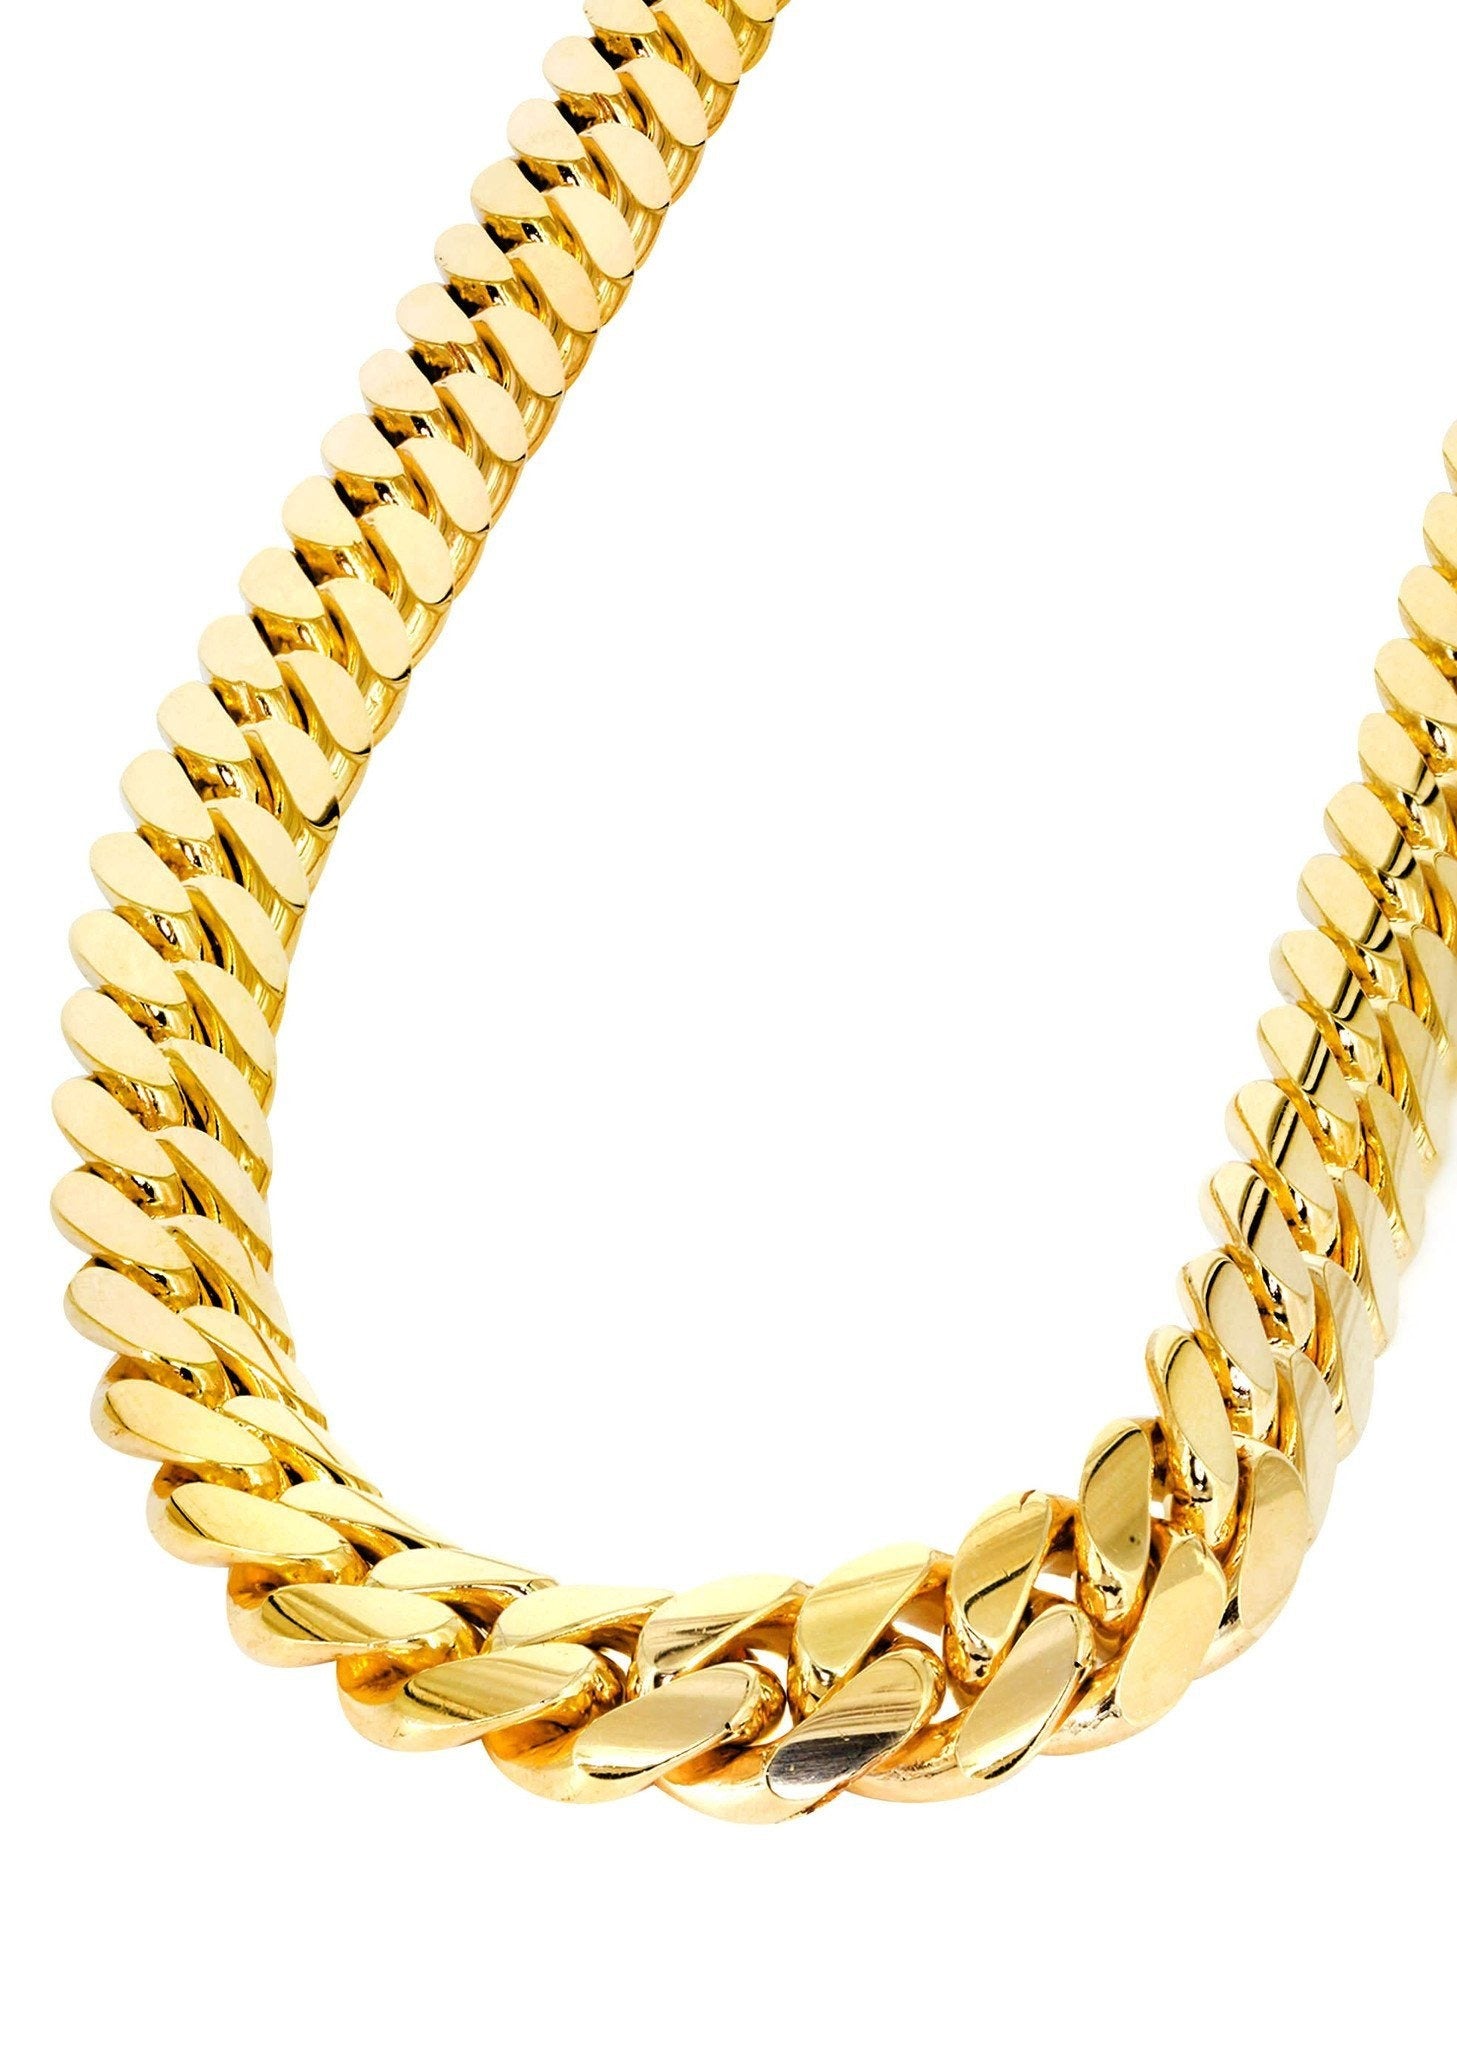 14K Gold Chain - Solid Miami Cuban Link Chain 14K Gold - GRILLZSTATION 